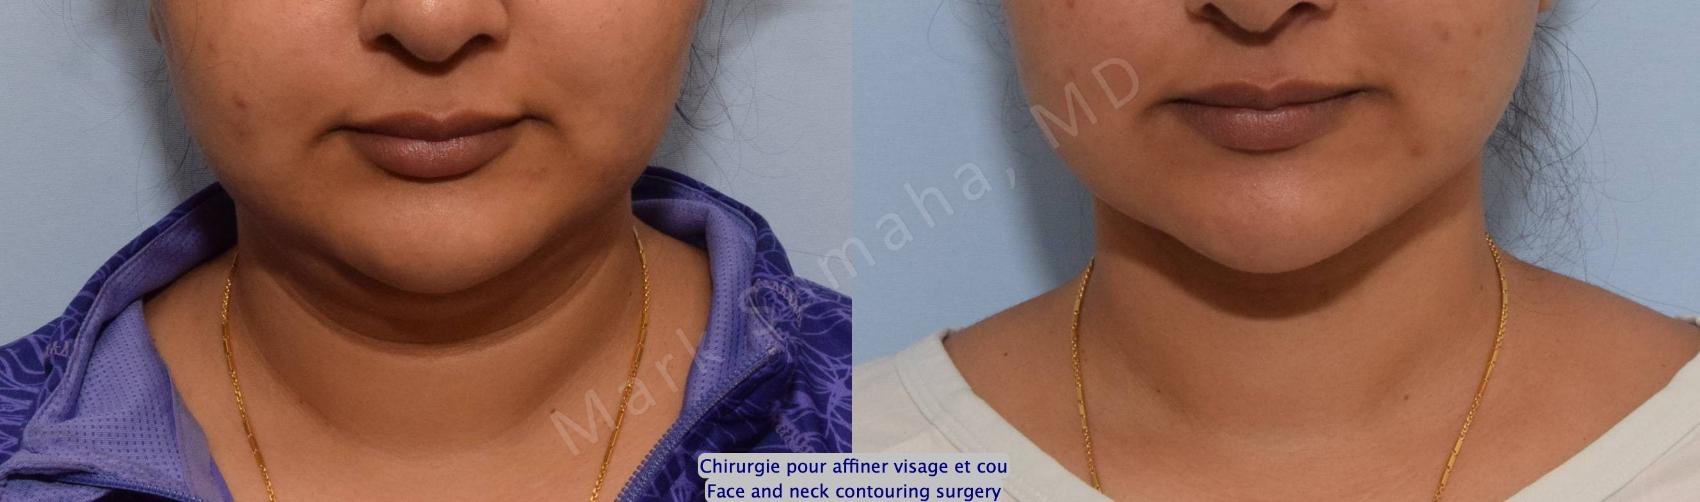 Before & After Chirurgie d’affinement du visage / Face Slimming Surgery Case 204 Front View in Montreal, QC